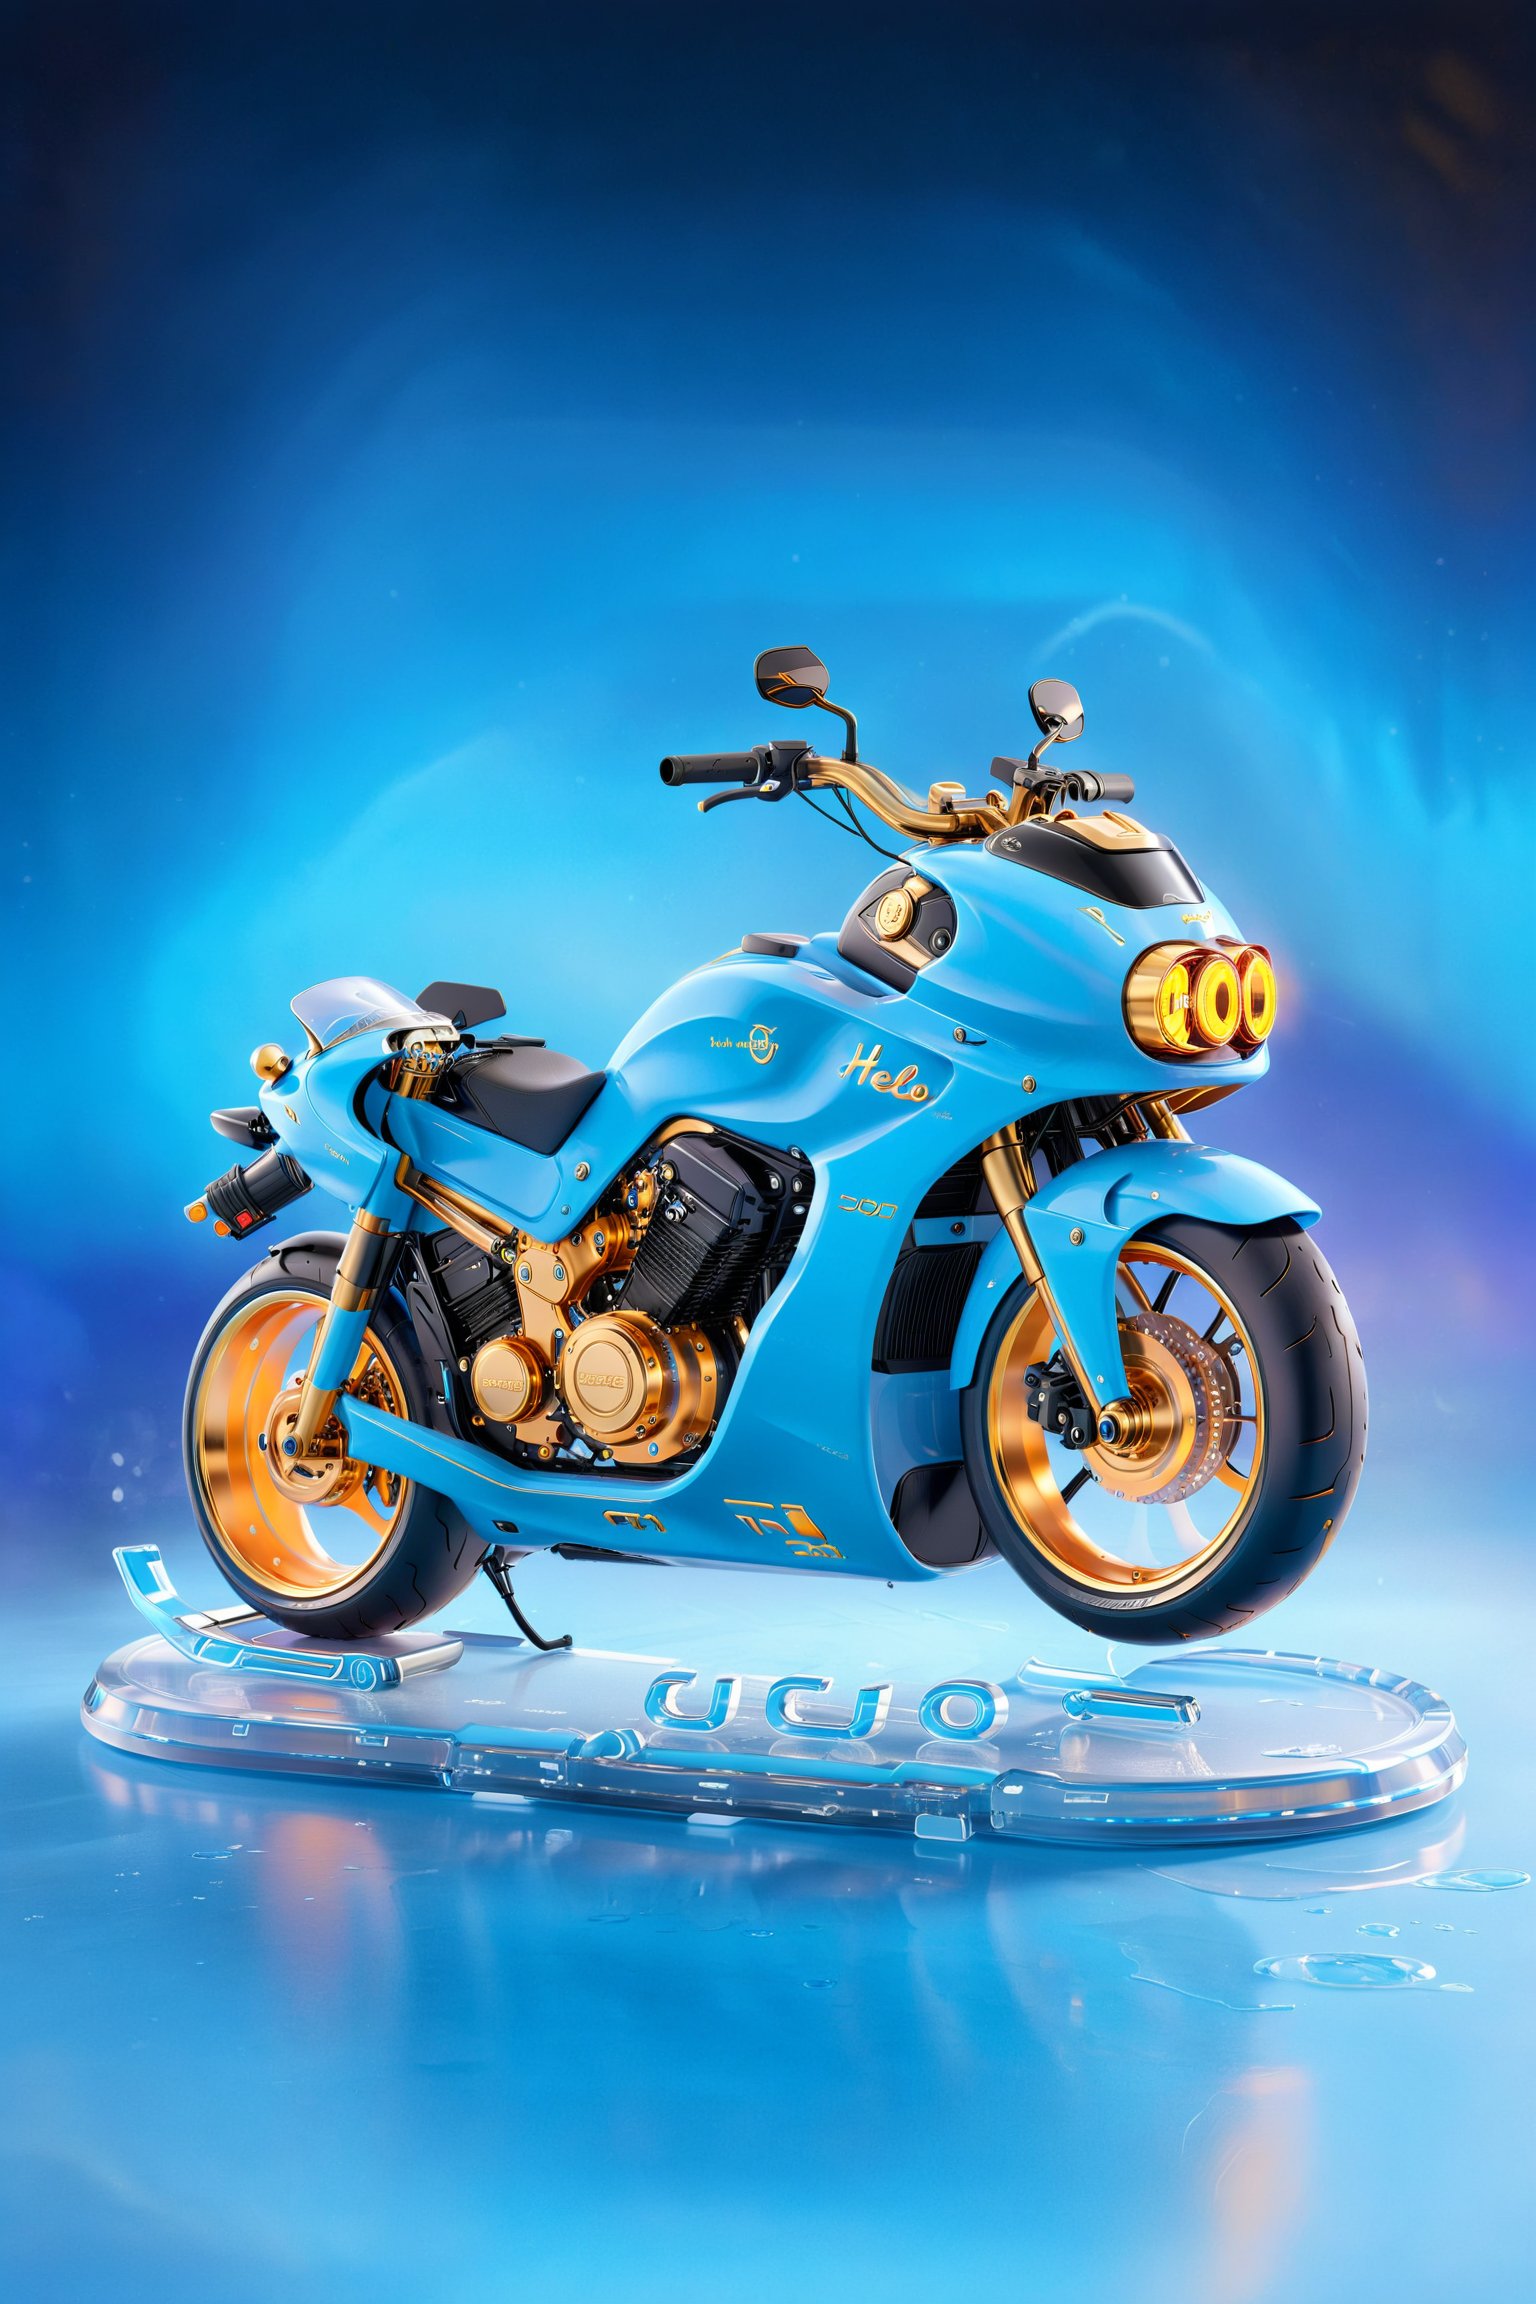 A futuristic and stunning creation of a 3D custom motorcycle, highlighted by gold accents and a blazing neon black glow. The motorcycle features a sleek and sophisticated look, inspired by the Yeosu, and adorns a shiny ice blue background that highlights its unique appearance. The name "Hello" is inscribed in large cursive letters, with a refined and elegant effect thanks to the intense gold outline. The "By Design Digital" stamp in soft golden tones is a recognition of the talent and skill of the digital artist in this masterpiece.lighting bokeh background.